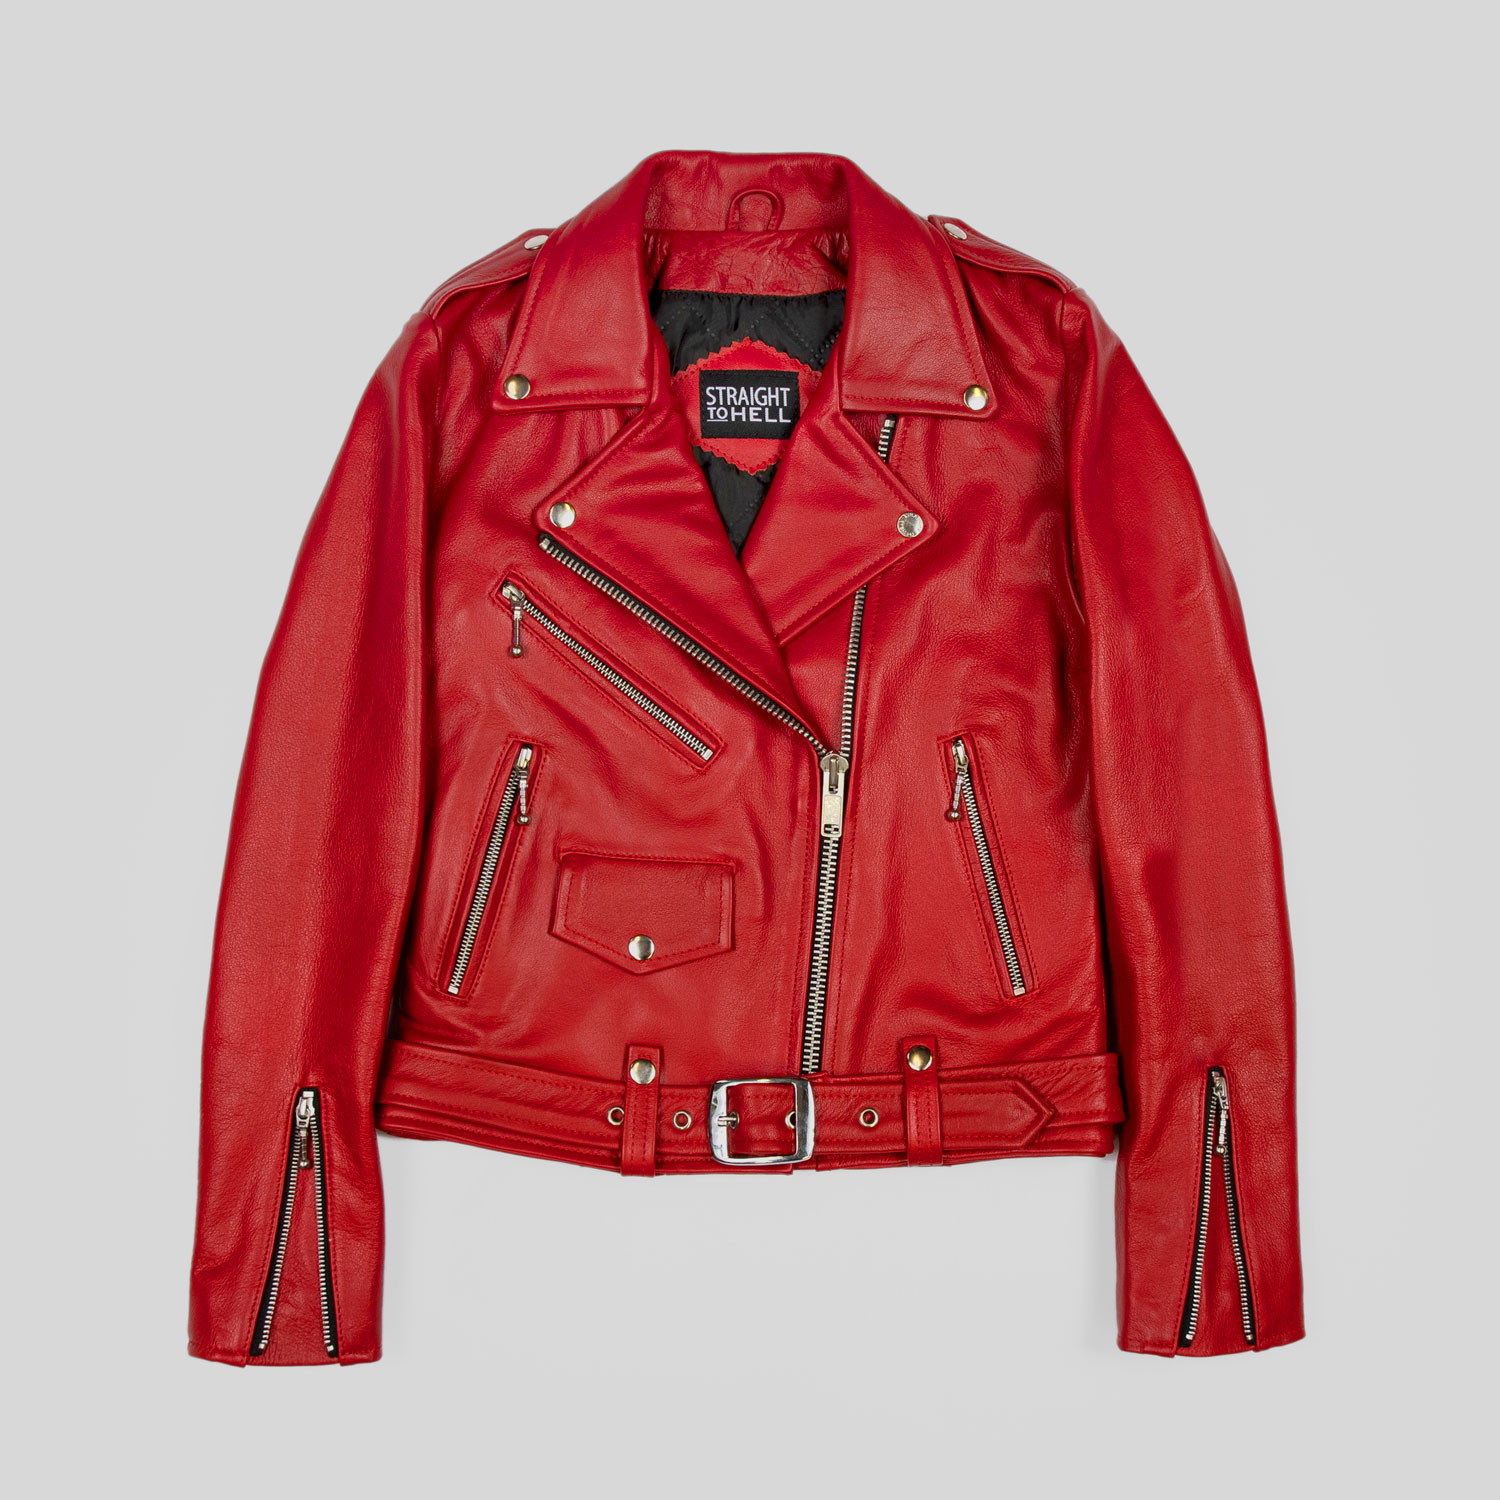 Commando - Blood Red Leather Jacket | Straight To Hell Apparel | Übergangsjacken